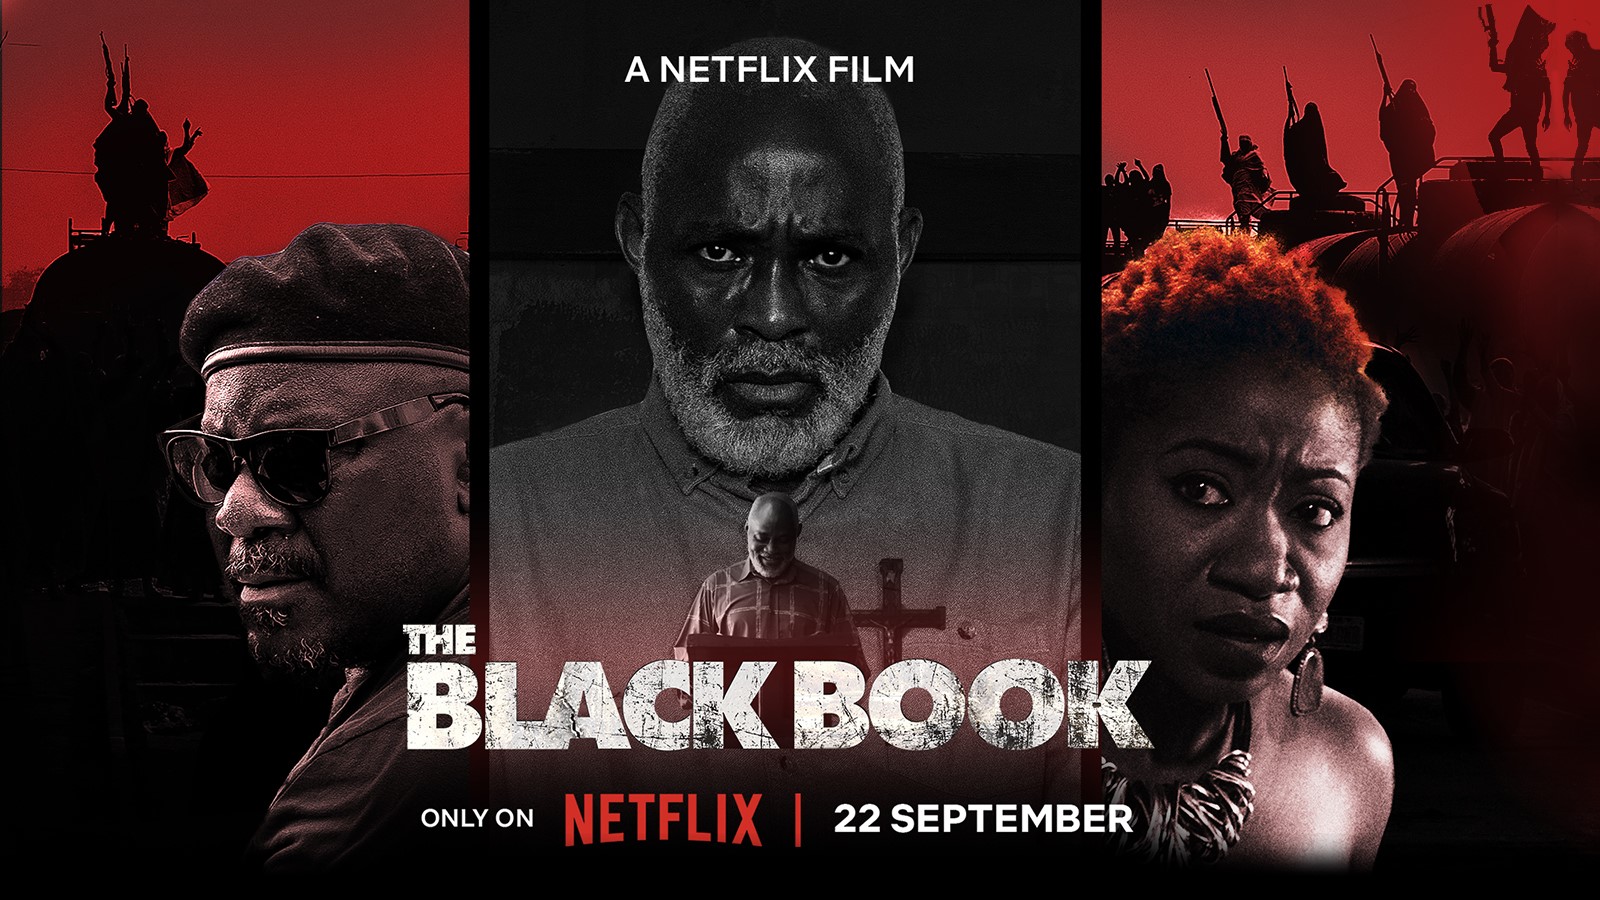 Netflix's The Black Book: A Gritty Tale of Revenge and Cultural Depth